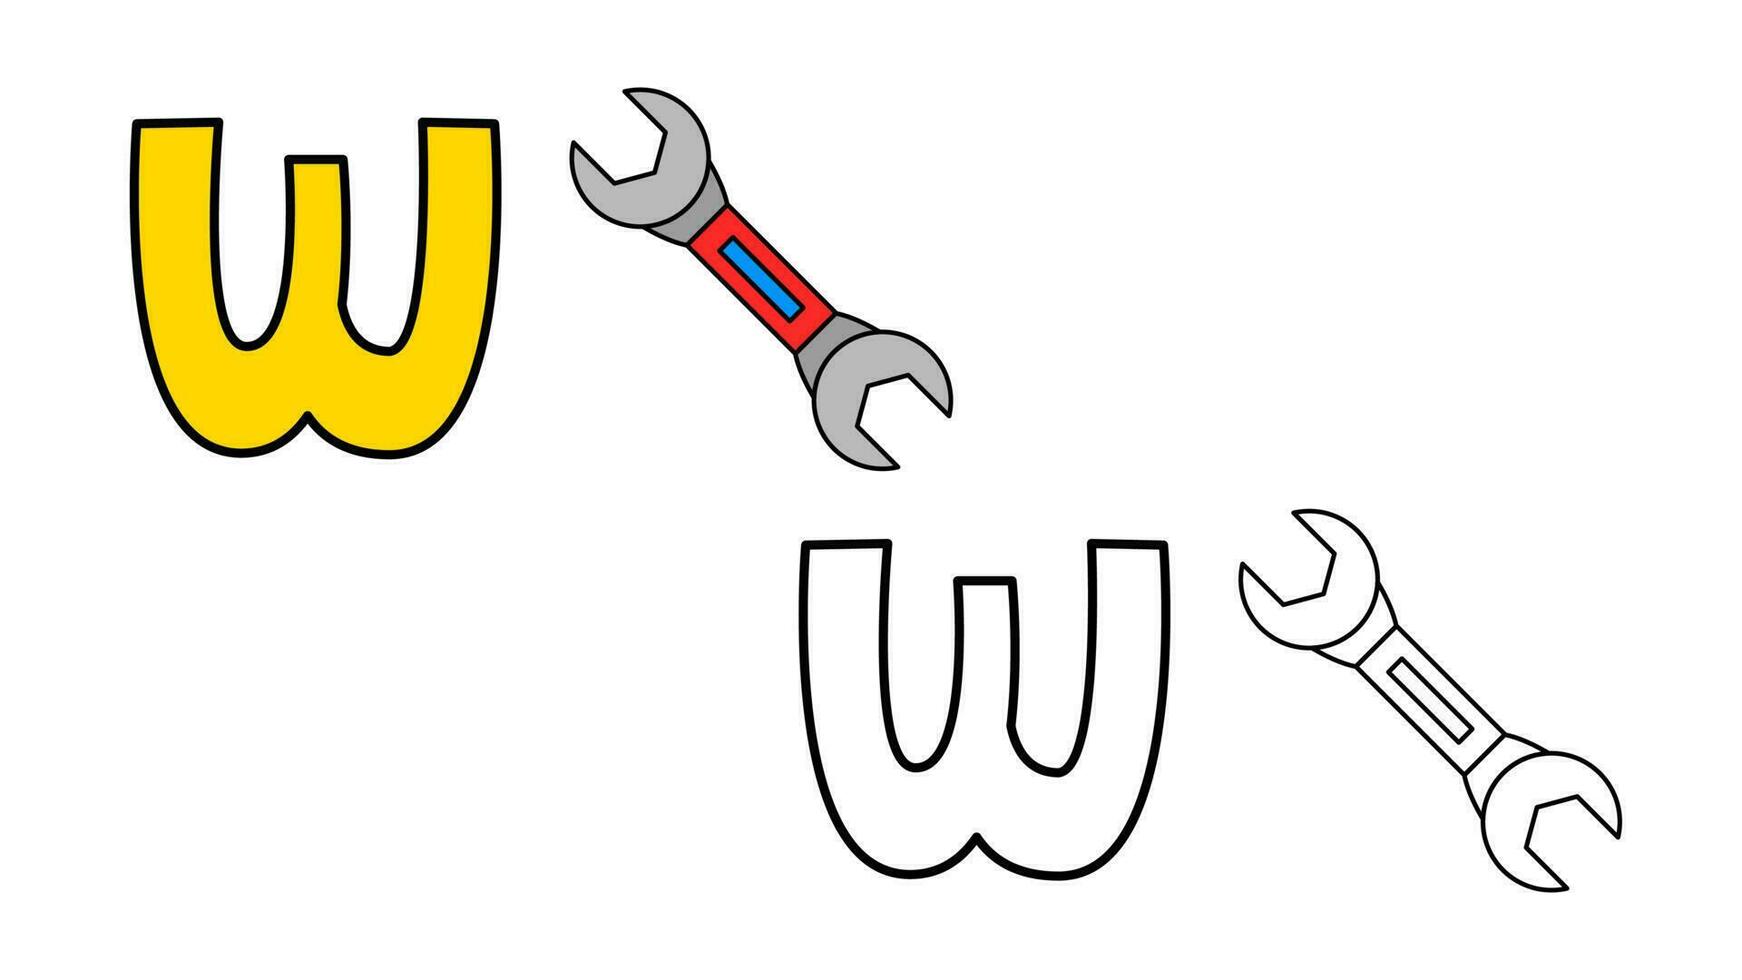 Cartoon wrench and letter w coloring book vector illustration for children